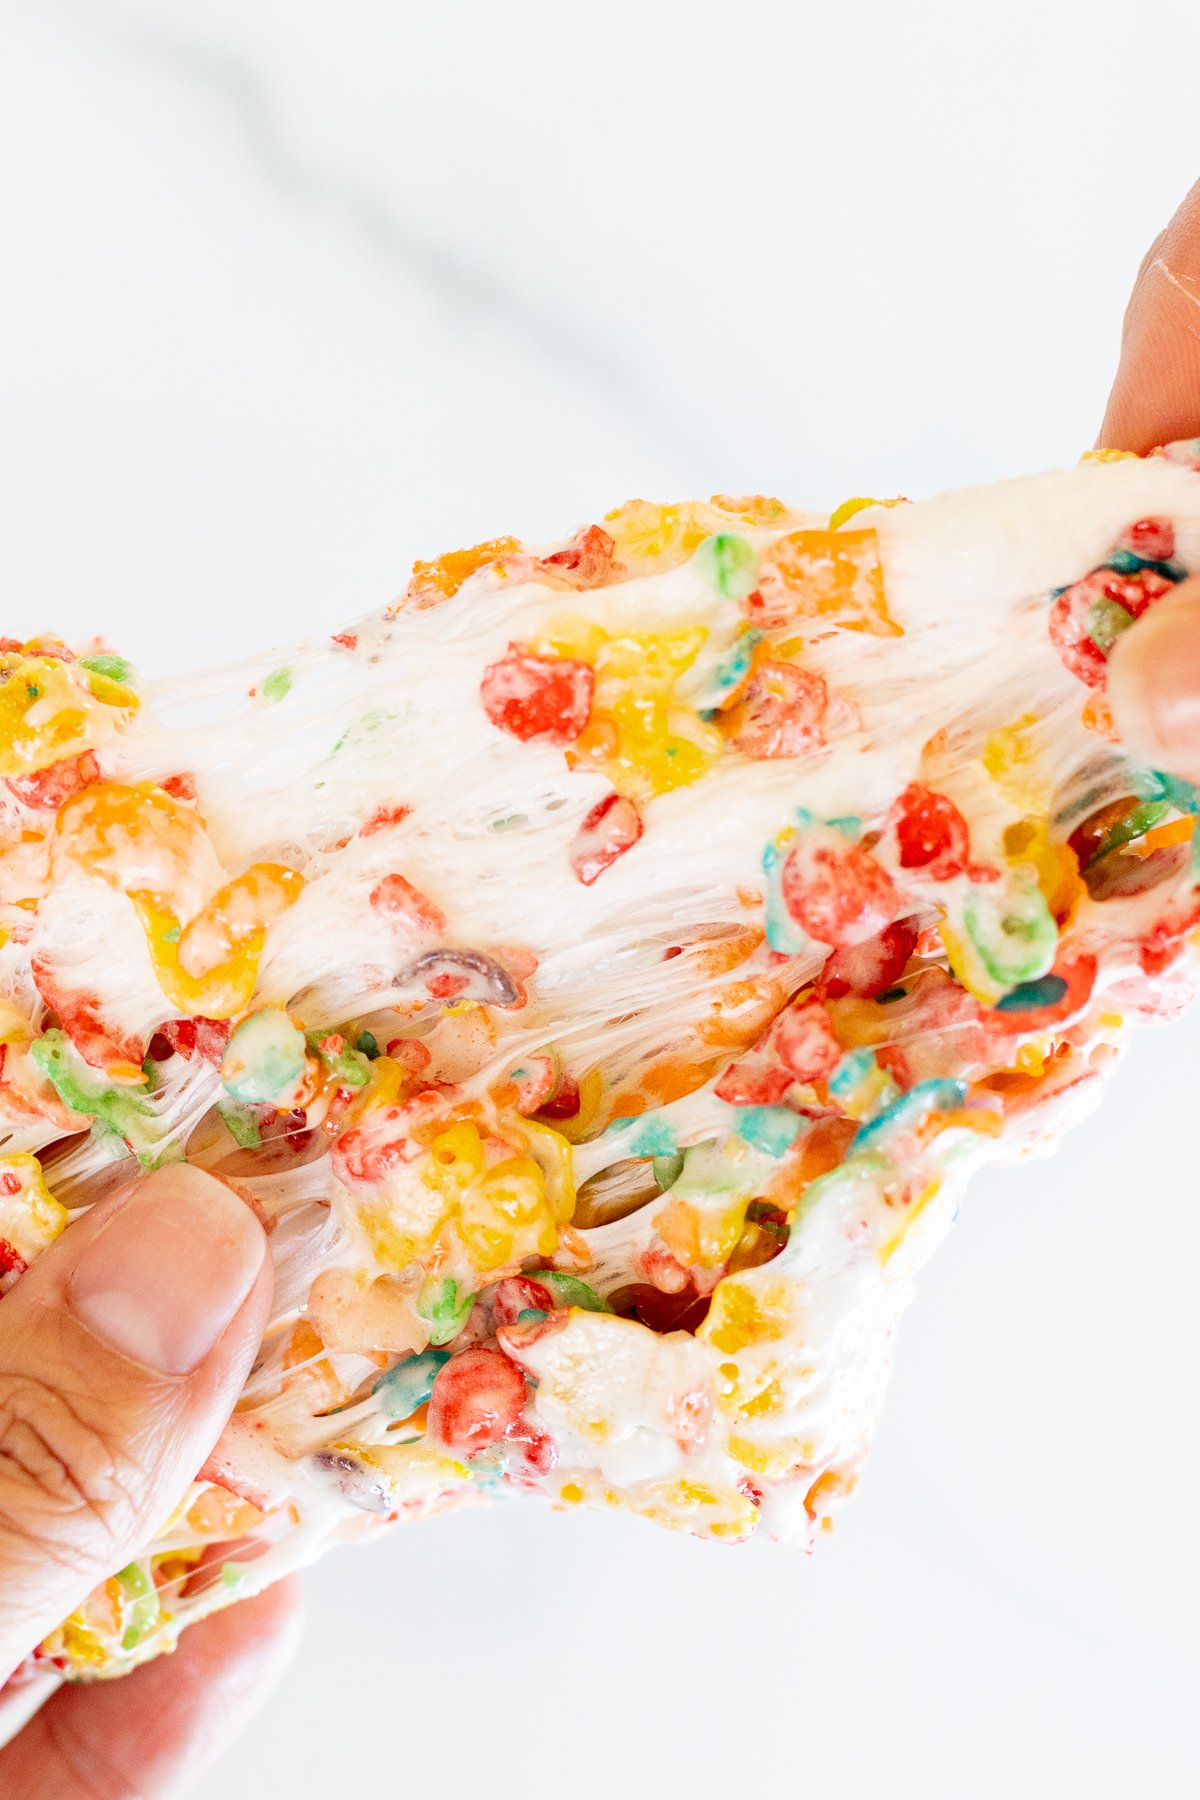 Hands pulling apart a Fruity Pebbles Treat to show chewy marshmallow